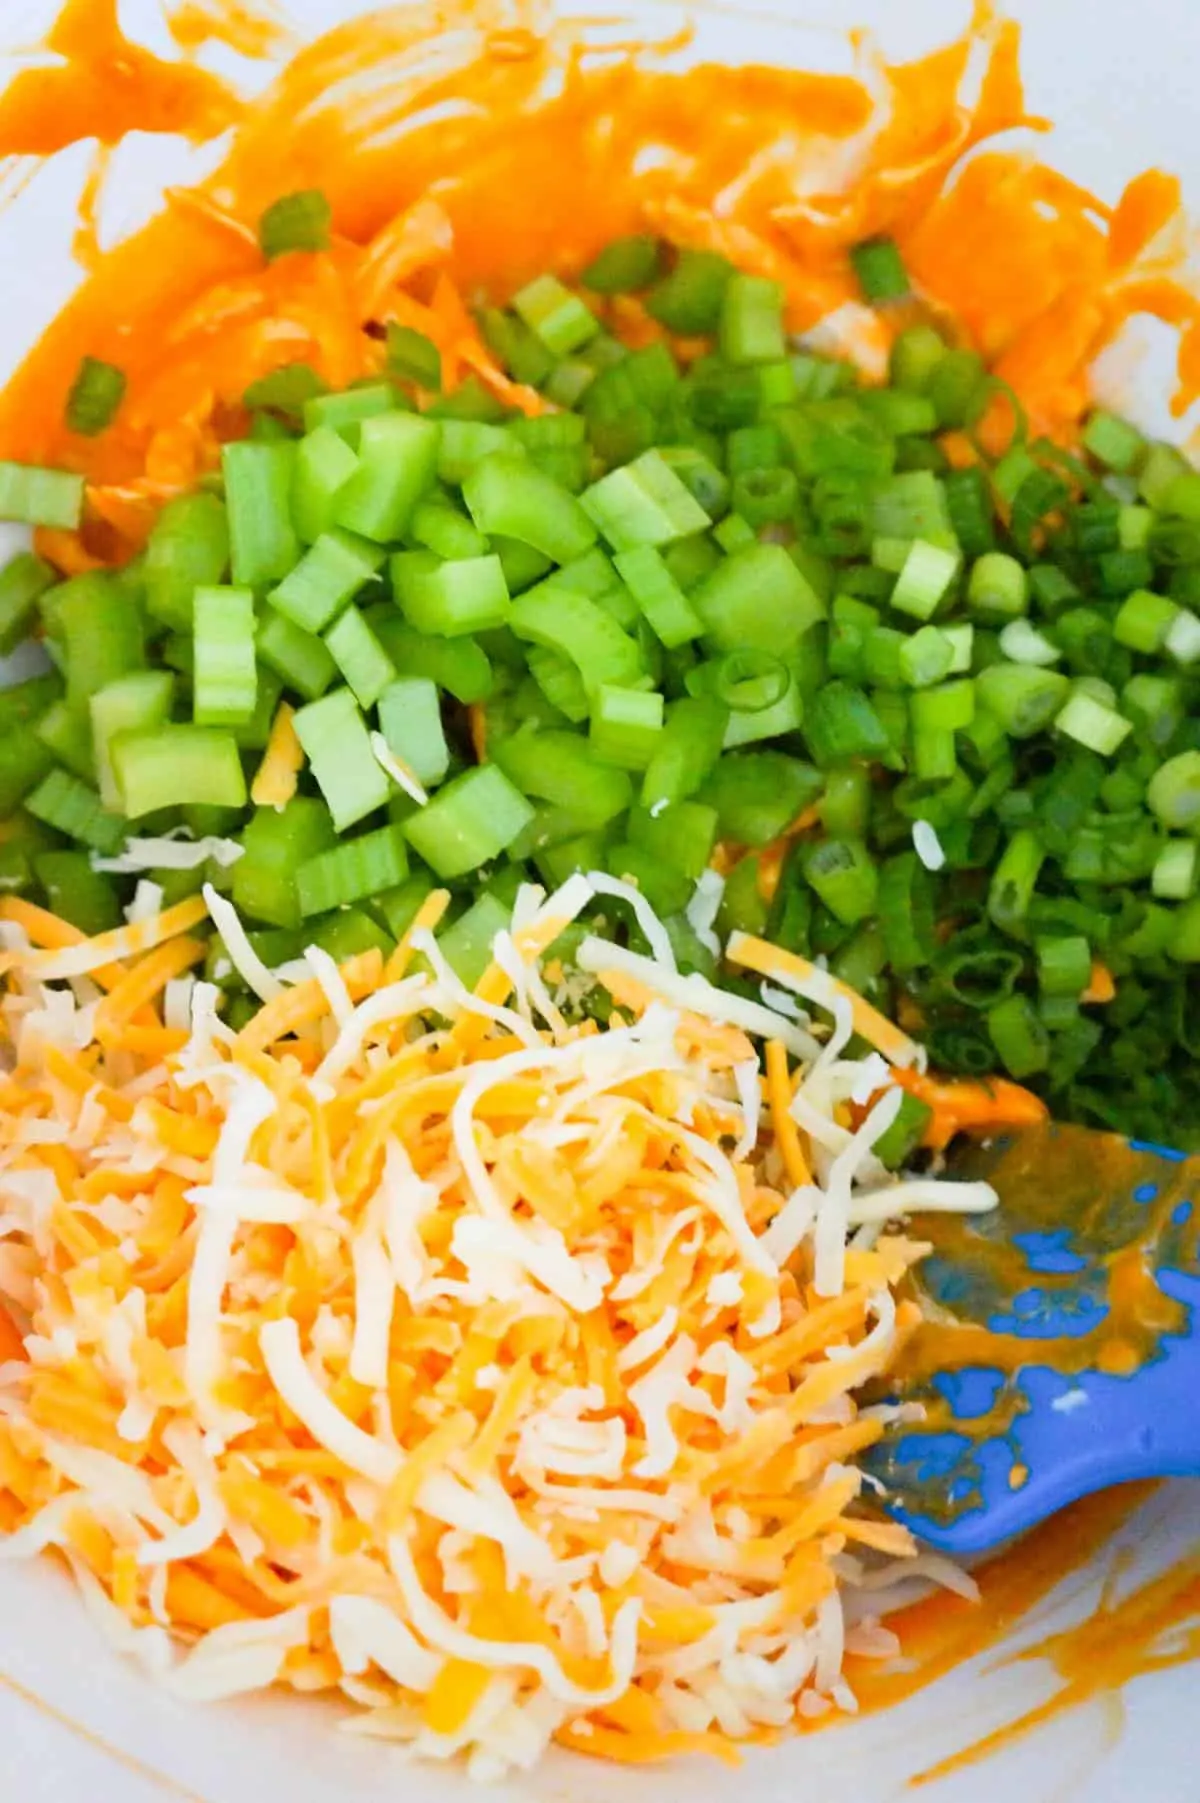 diced celery, chopped green onions and shredded cheese in a mixing bowl